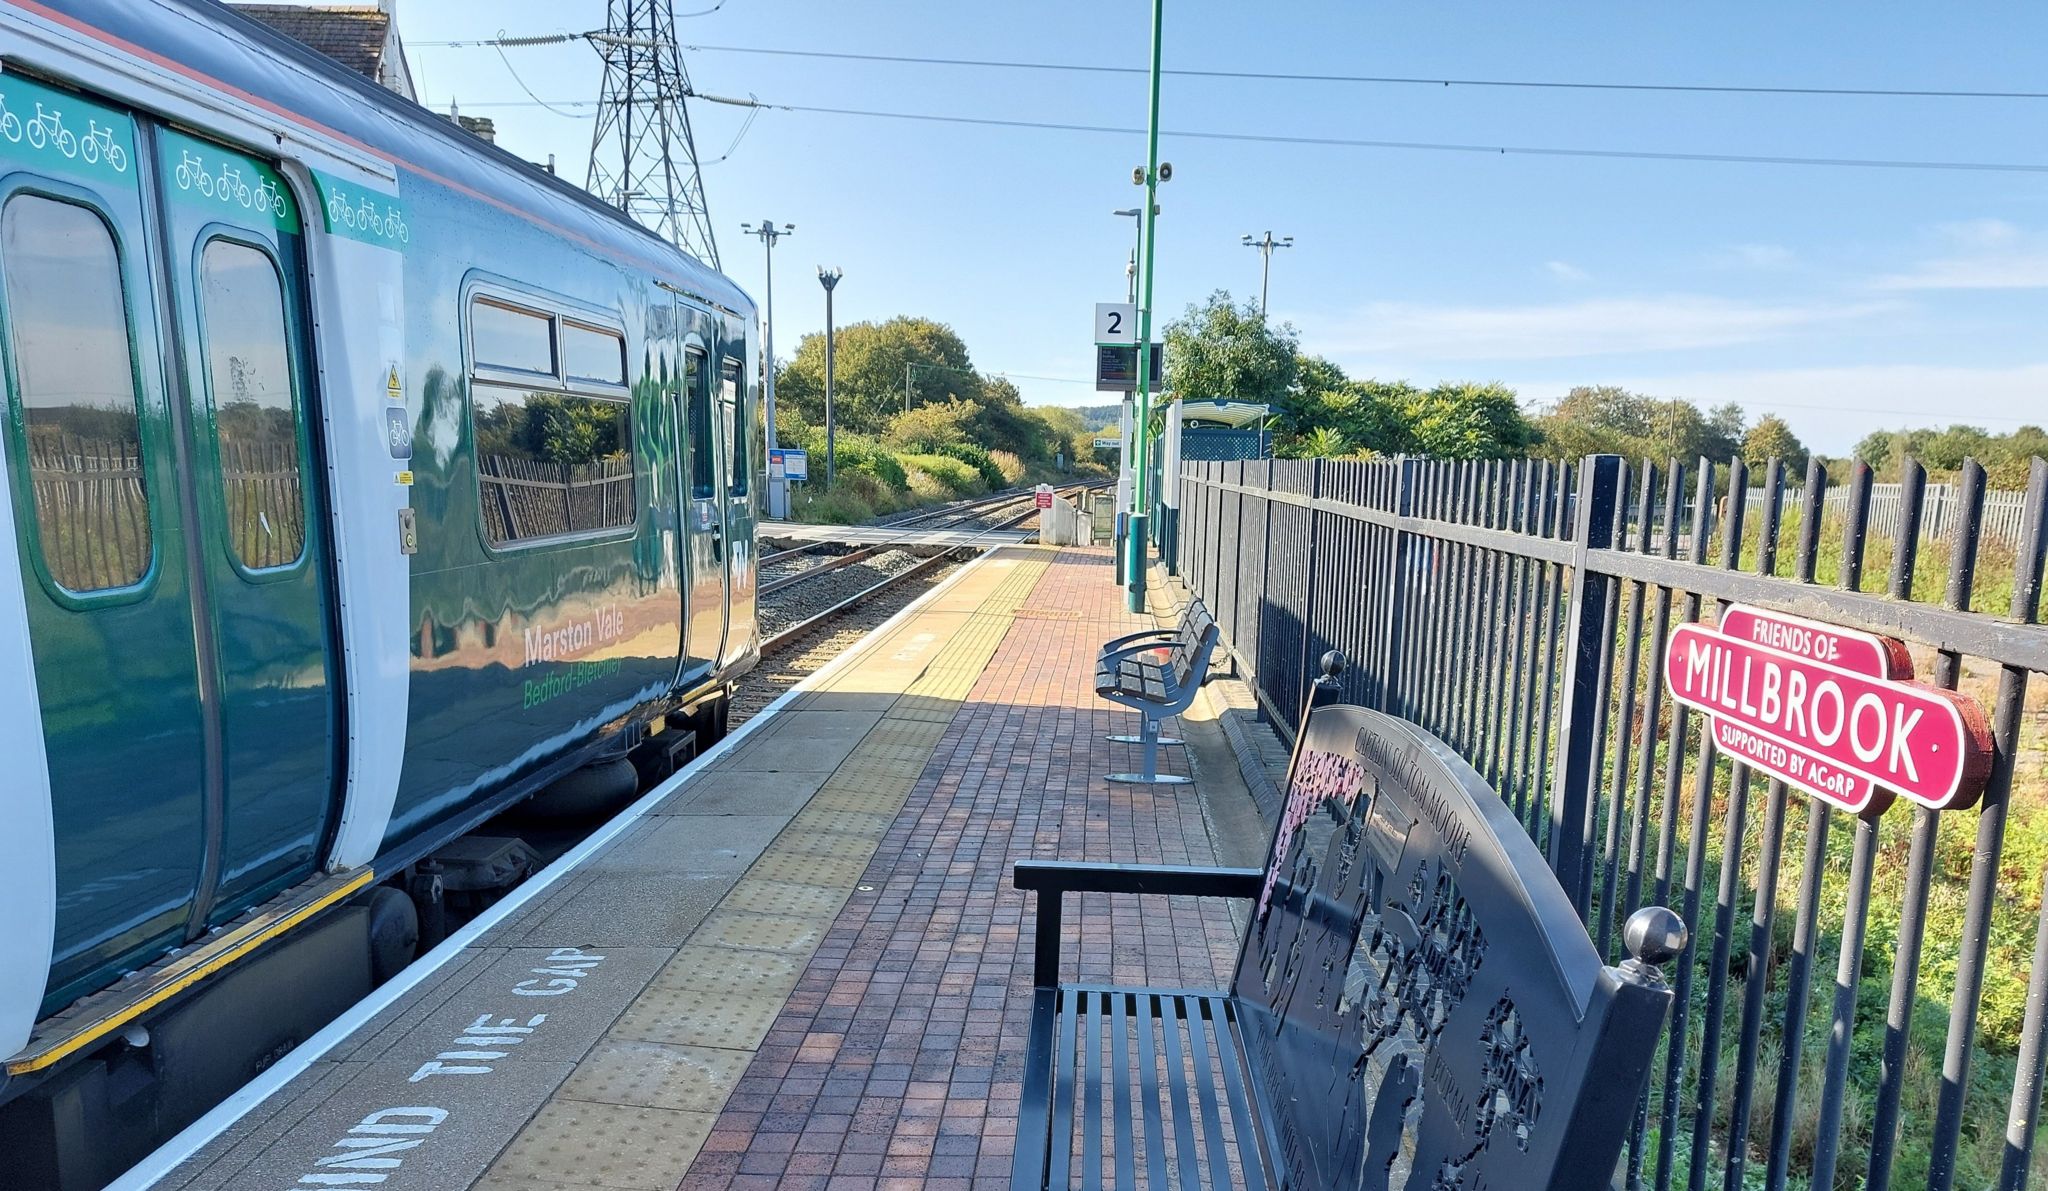 Unit 150137 pictured at Millbrook station on a test run on Friday 22 September